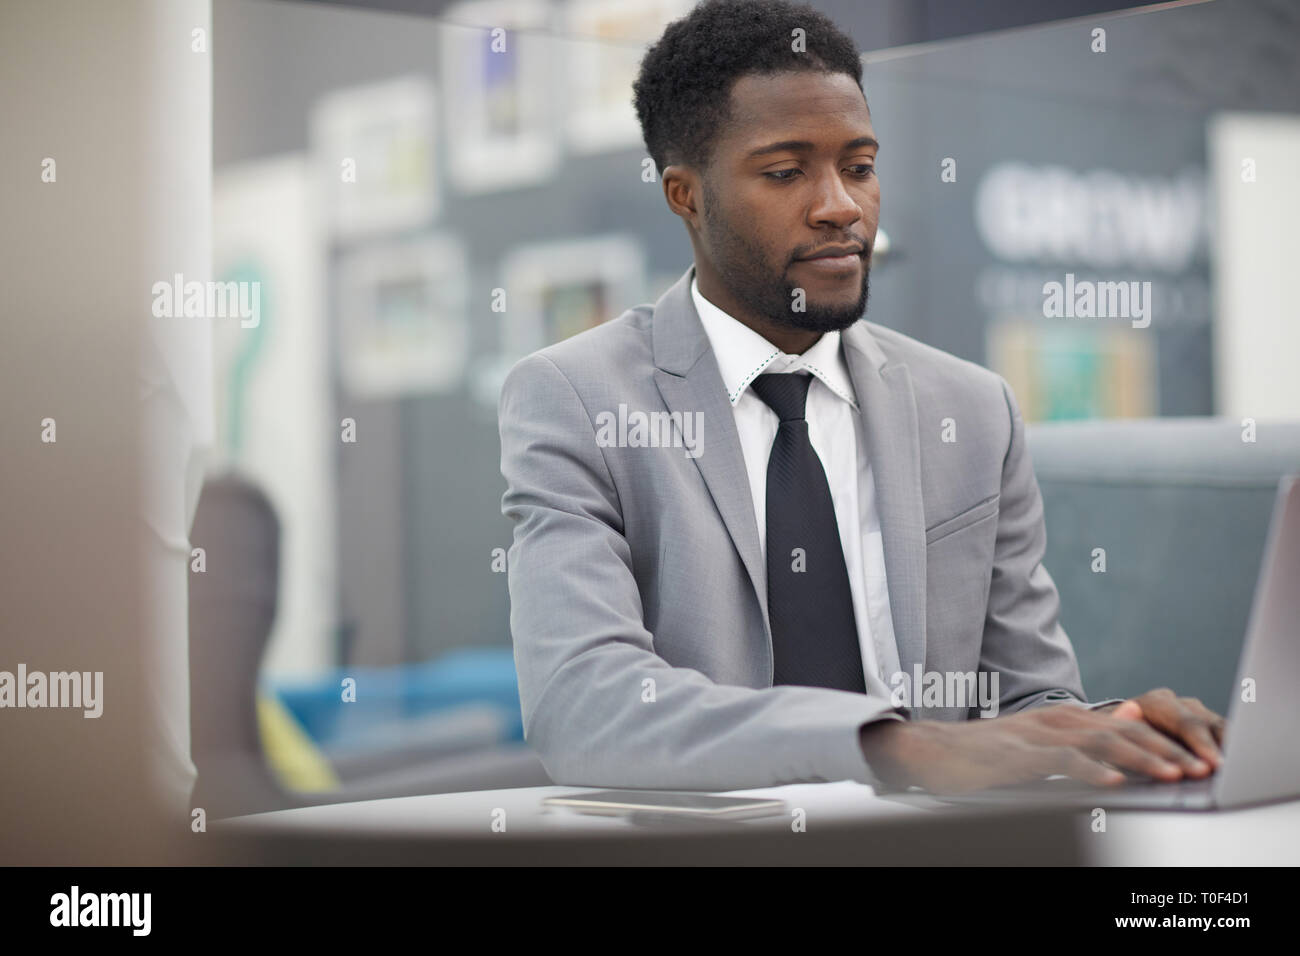 Successful African Businessman at Work Stock Photo